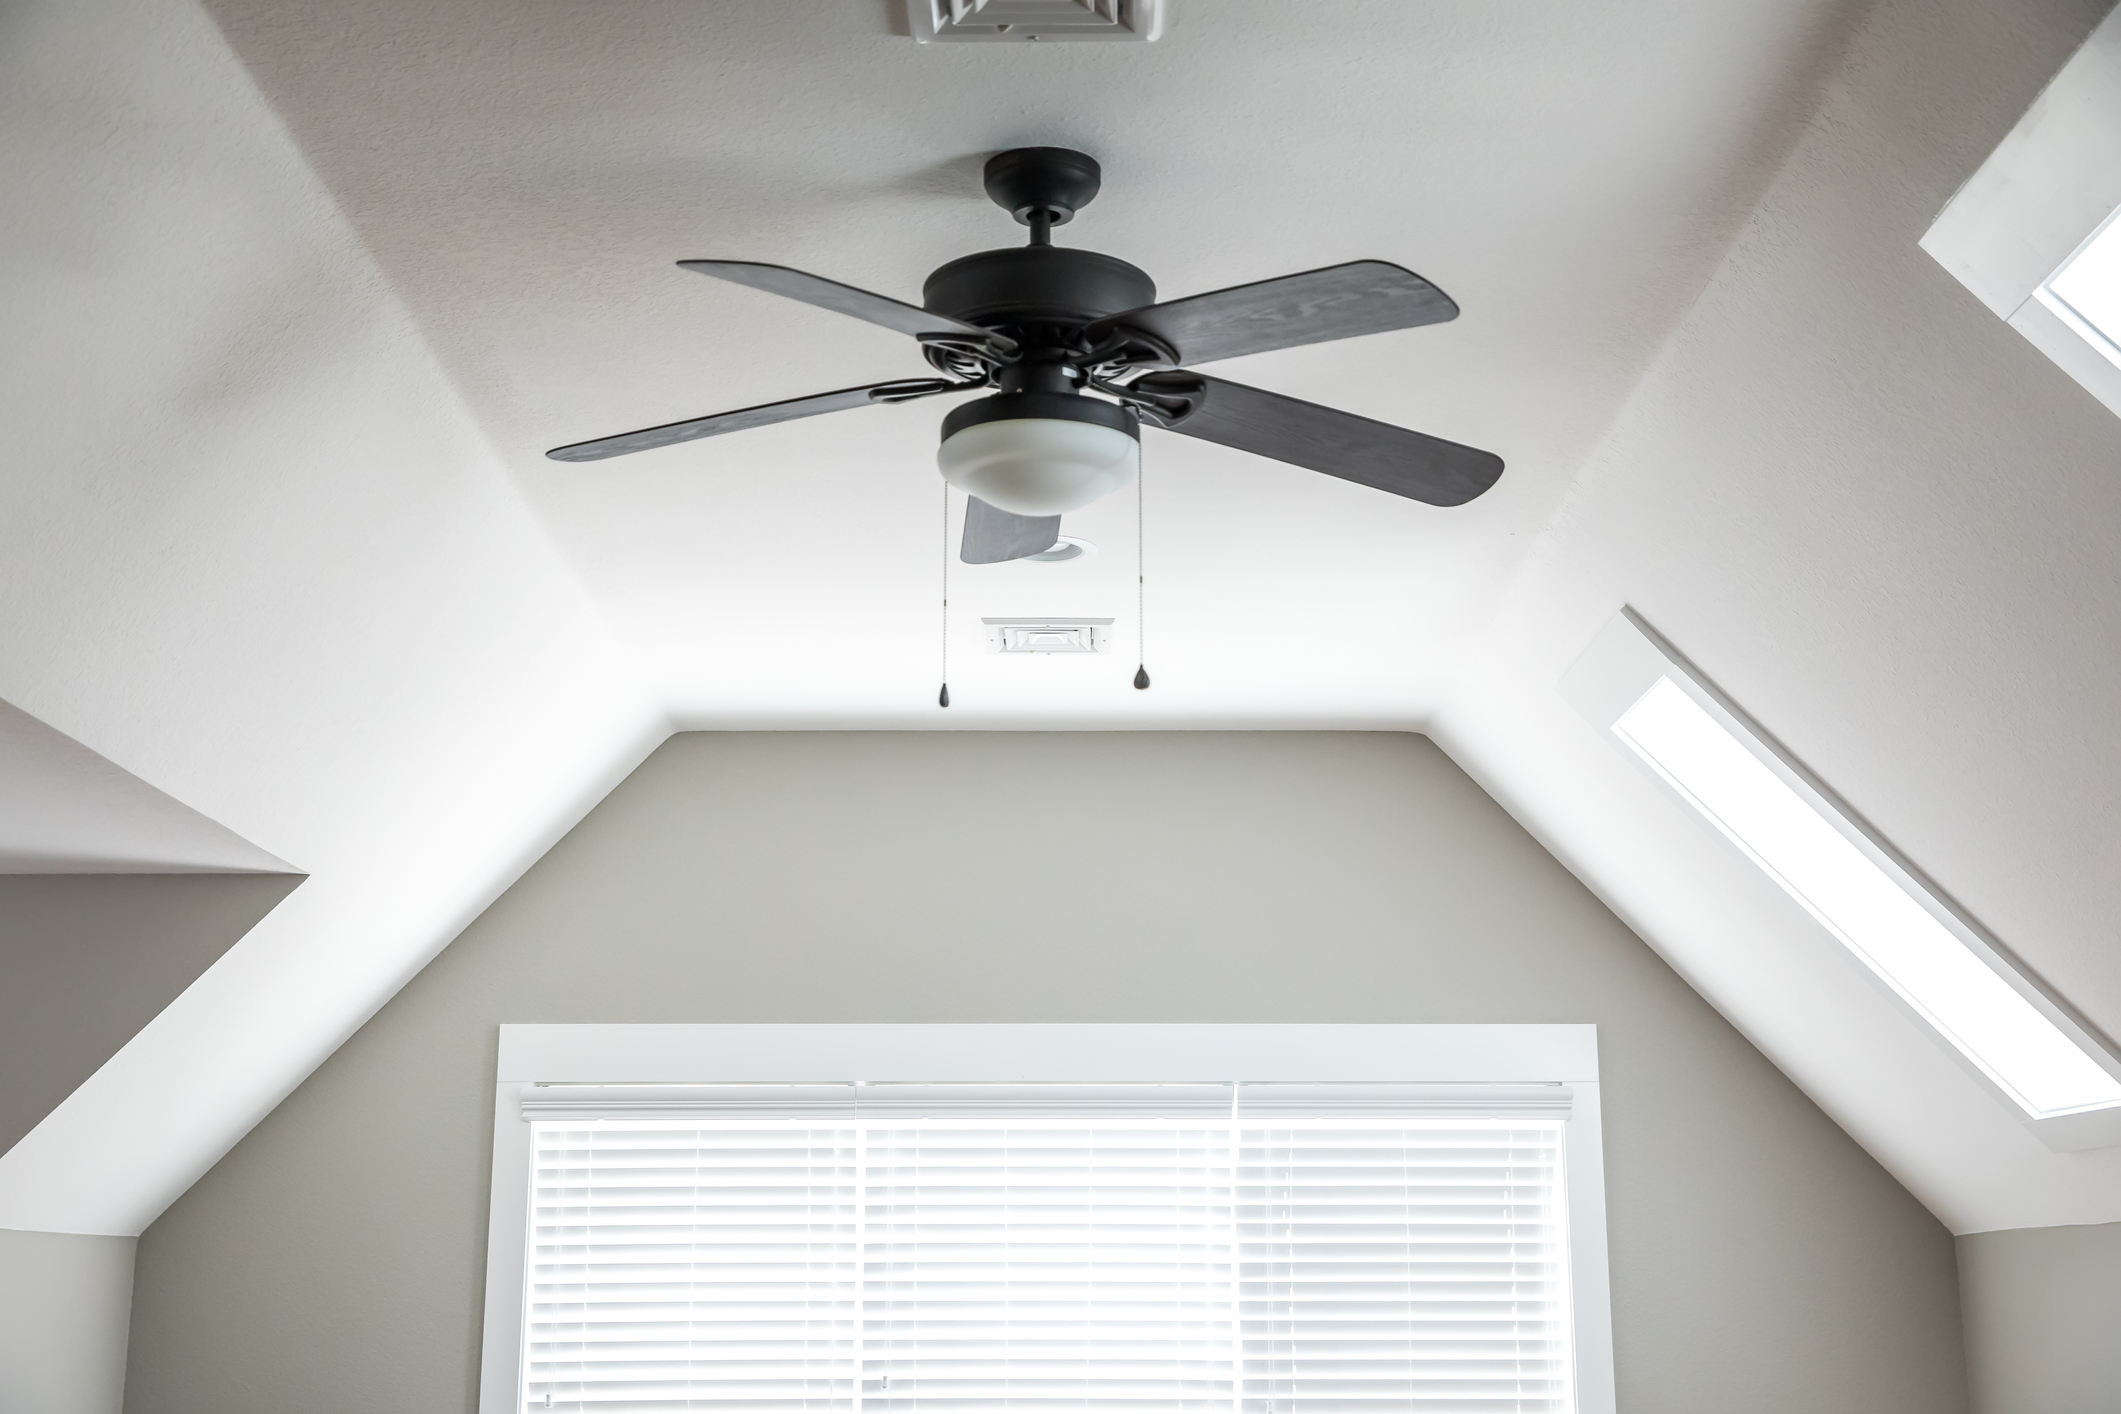 How to Measure a Ceiling Fan